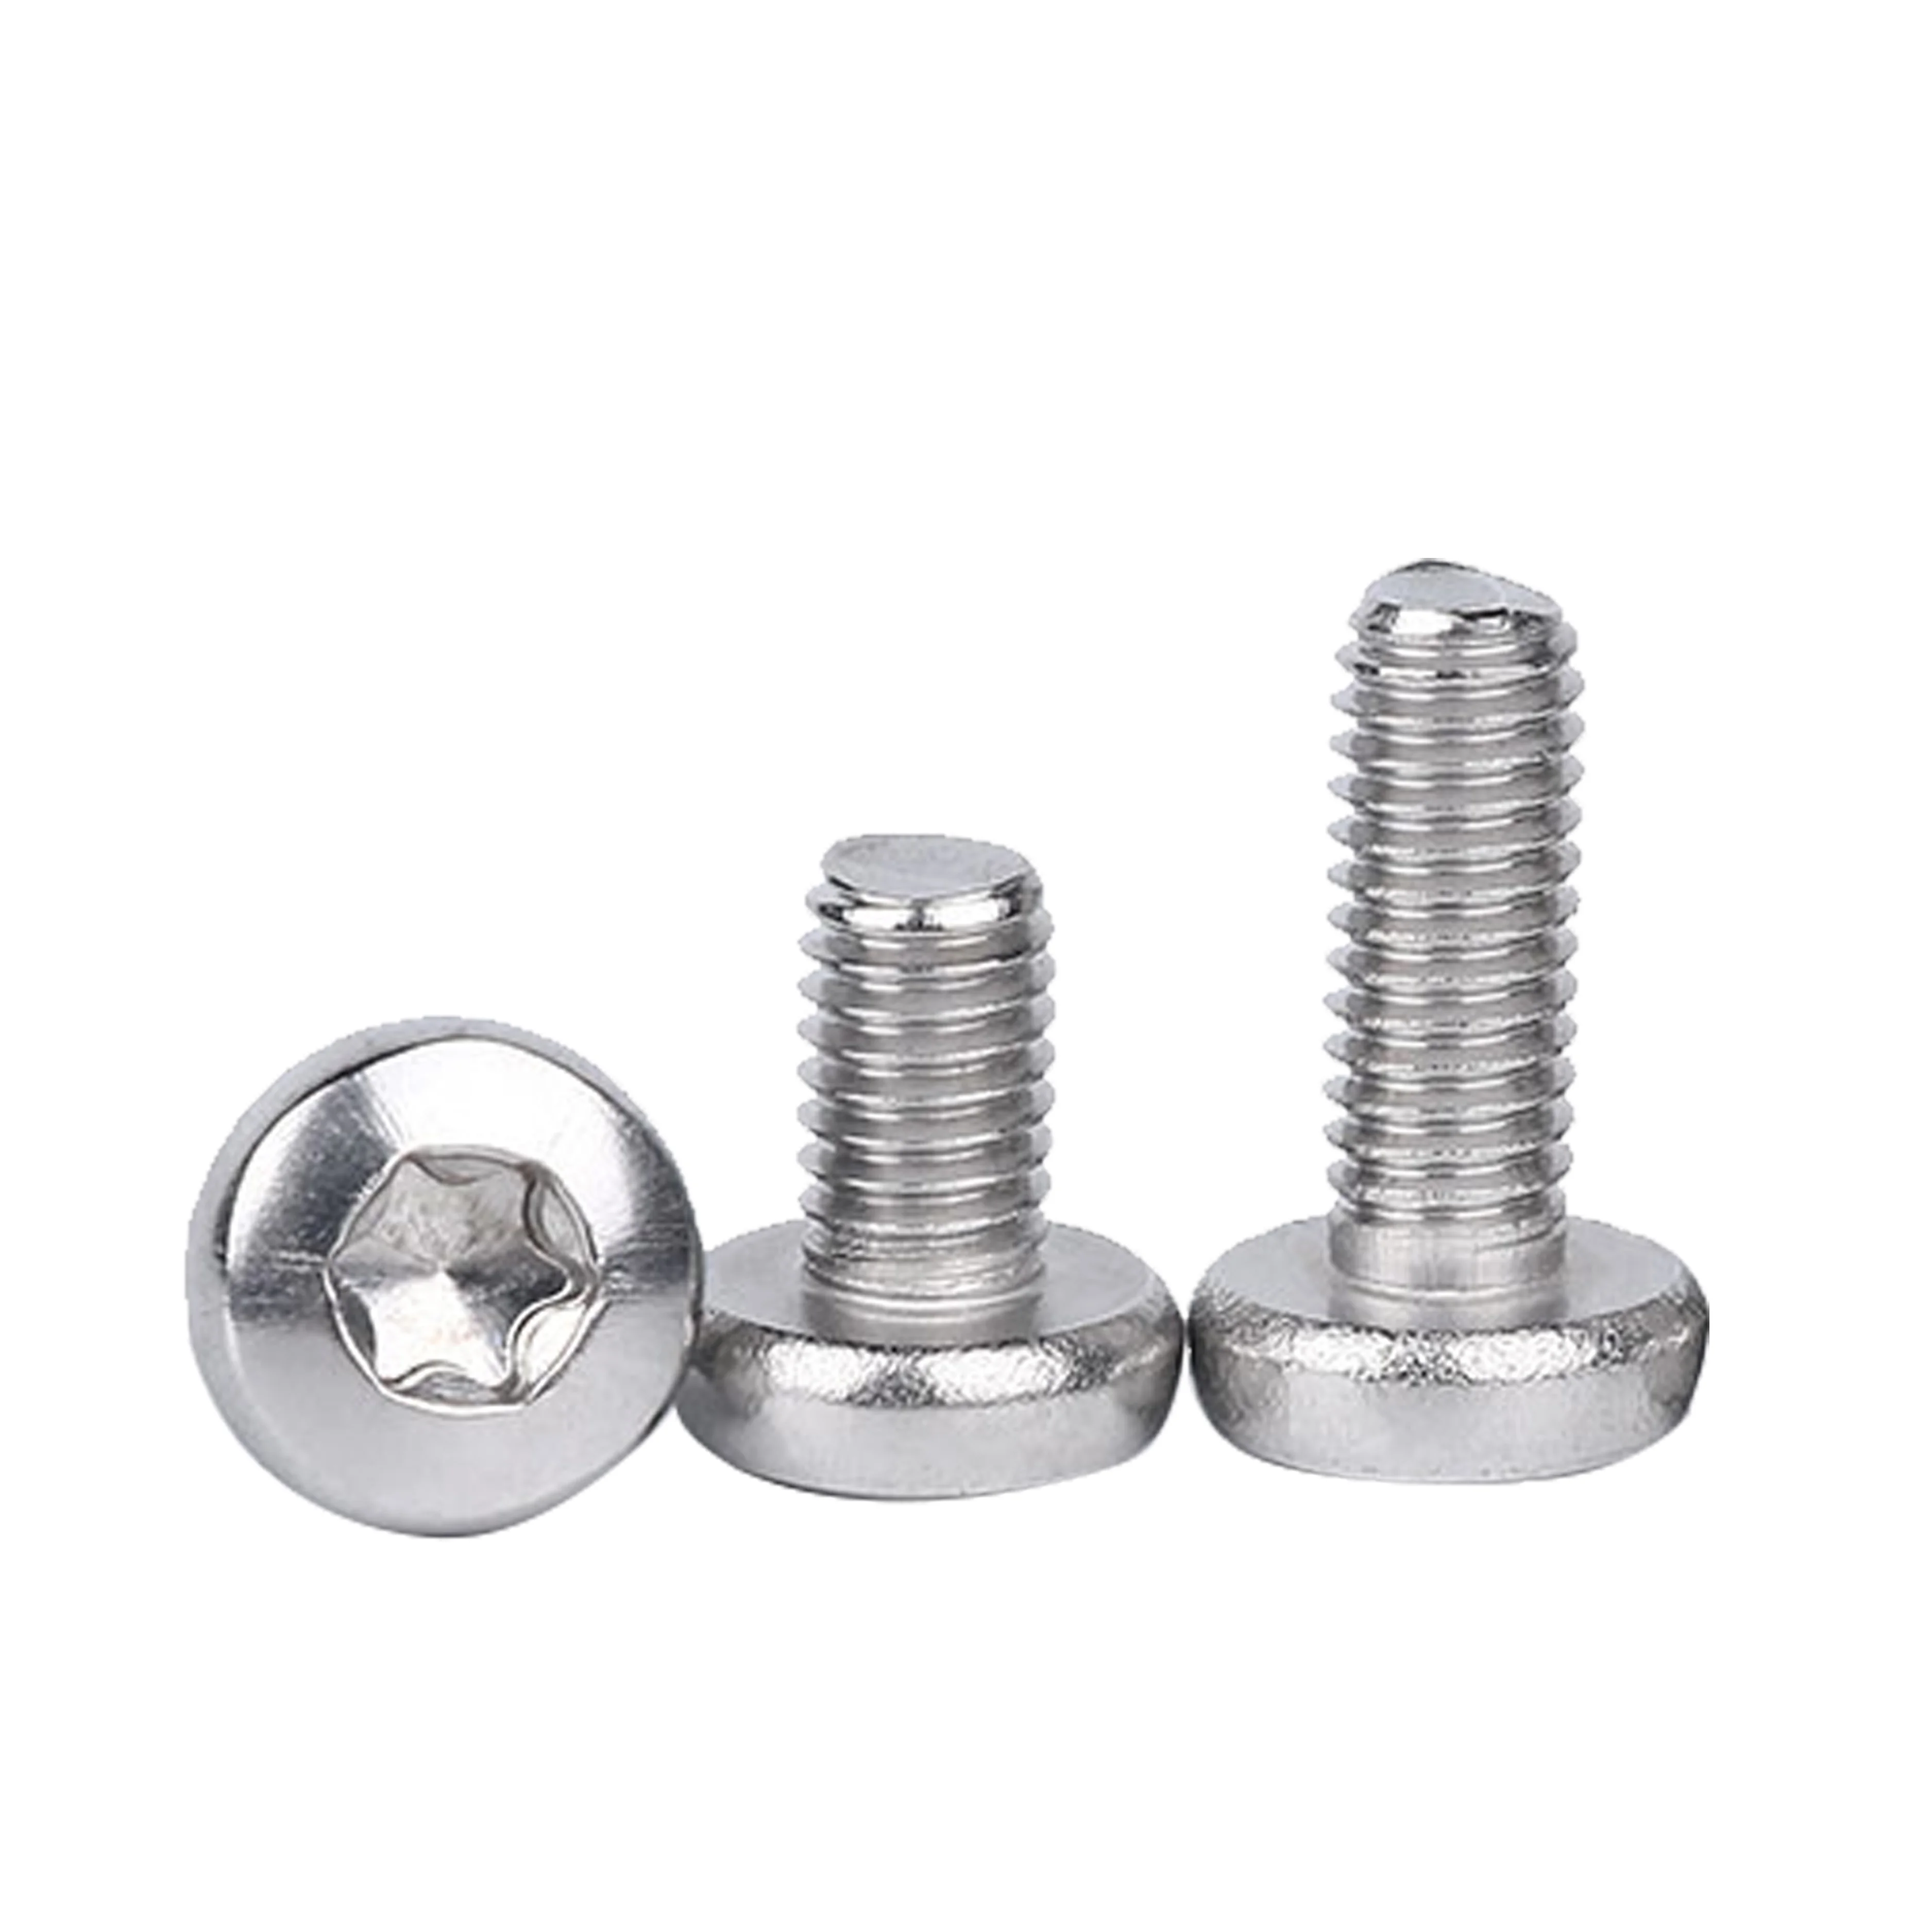 #2-56 Threads 1/2 Length Plain Finish Pack of 100 Binding Head Stainless Steel Machine Screw Slotted Drive